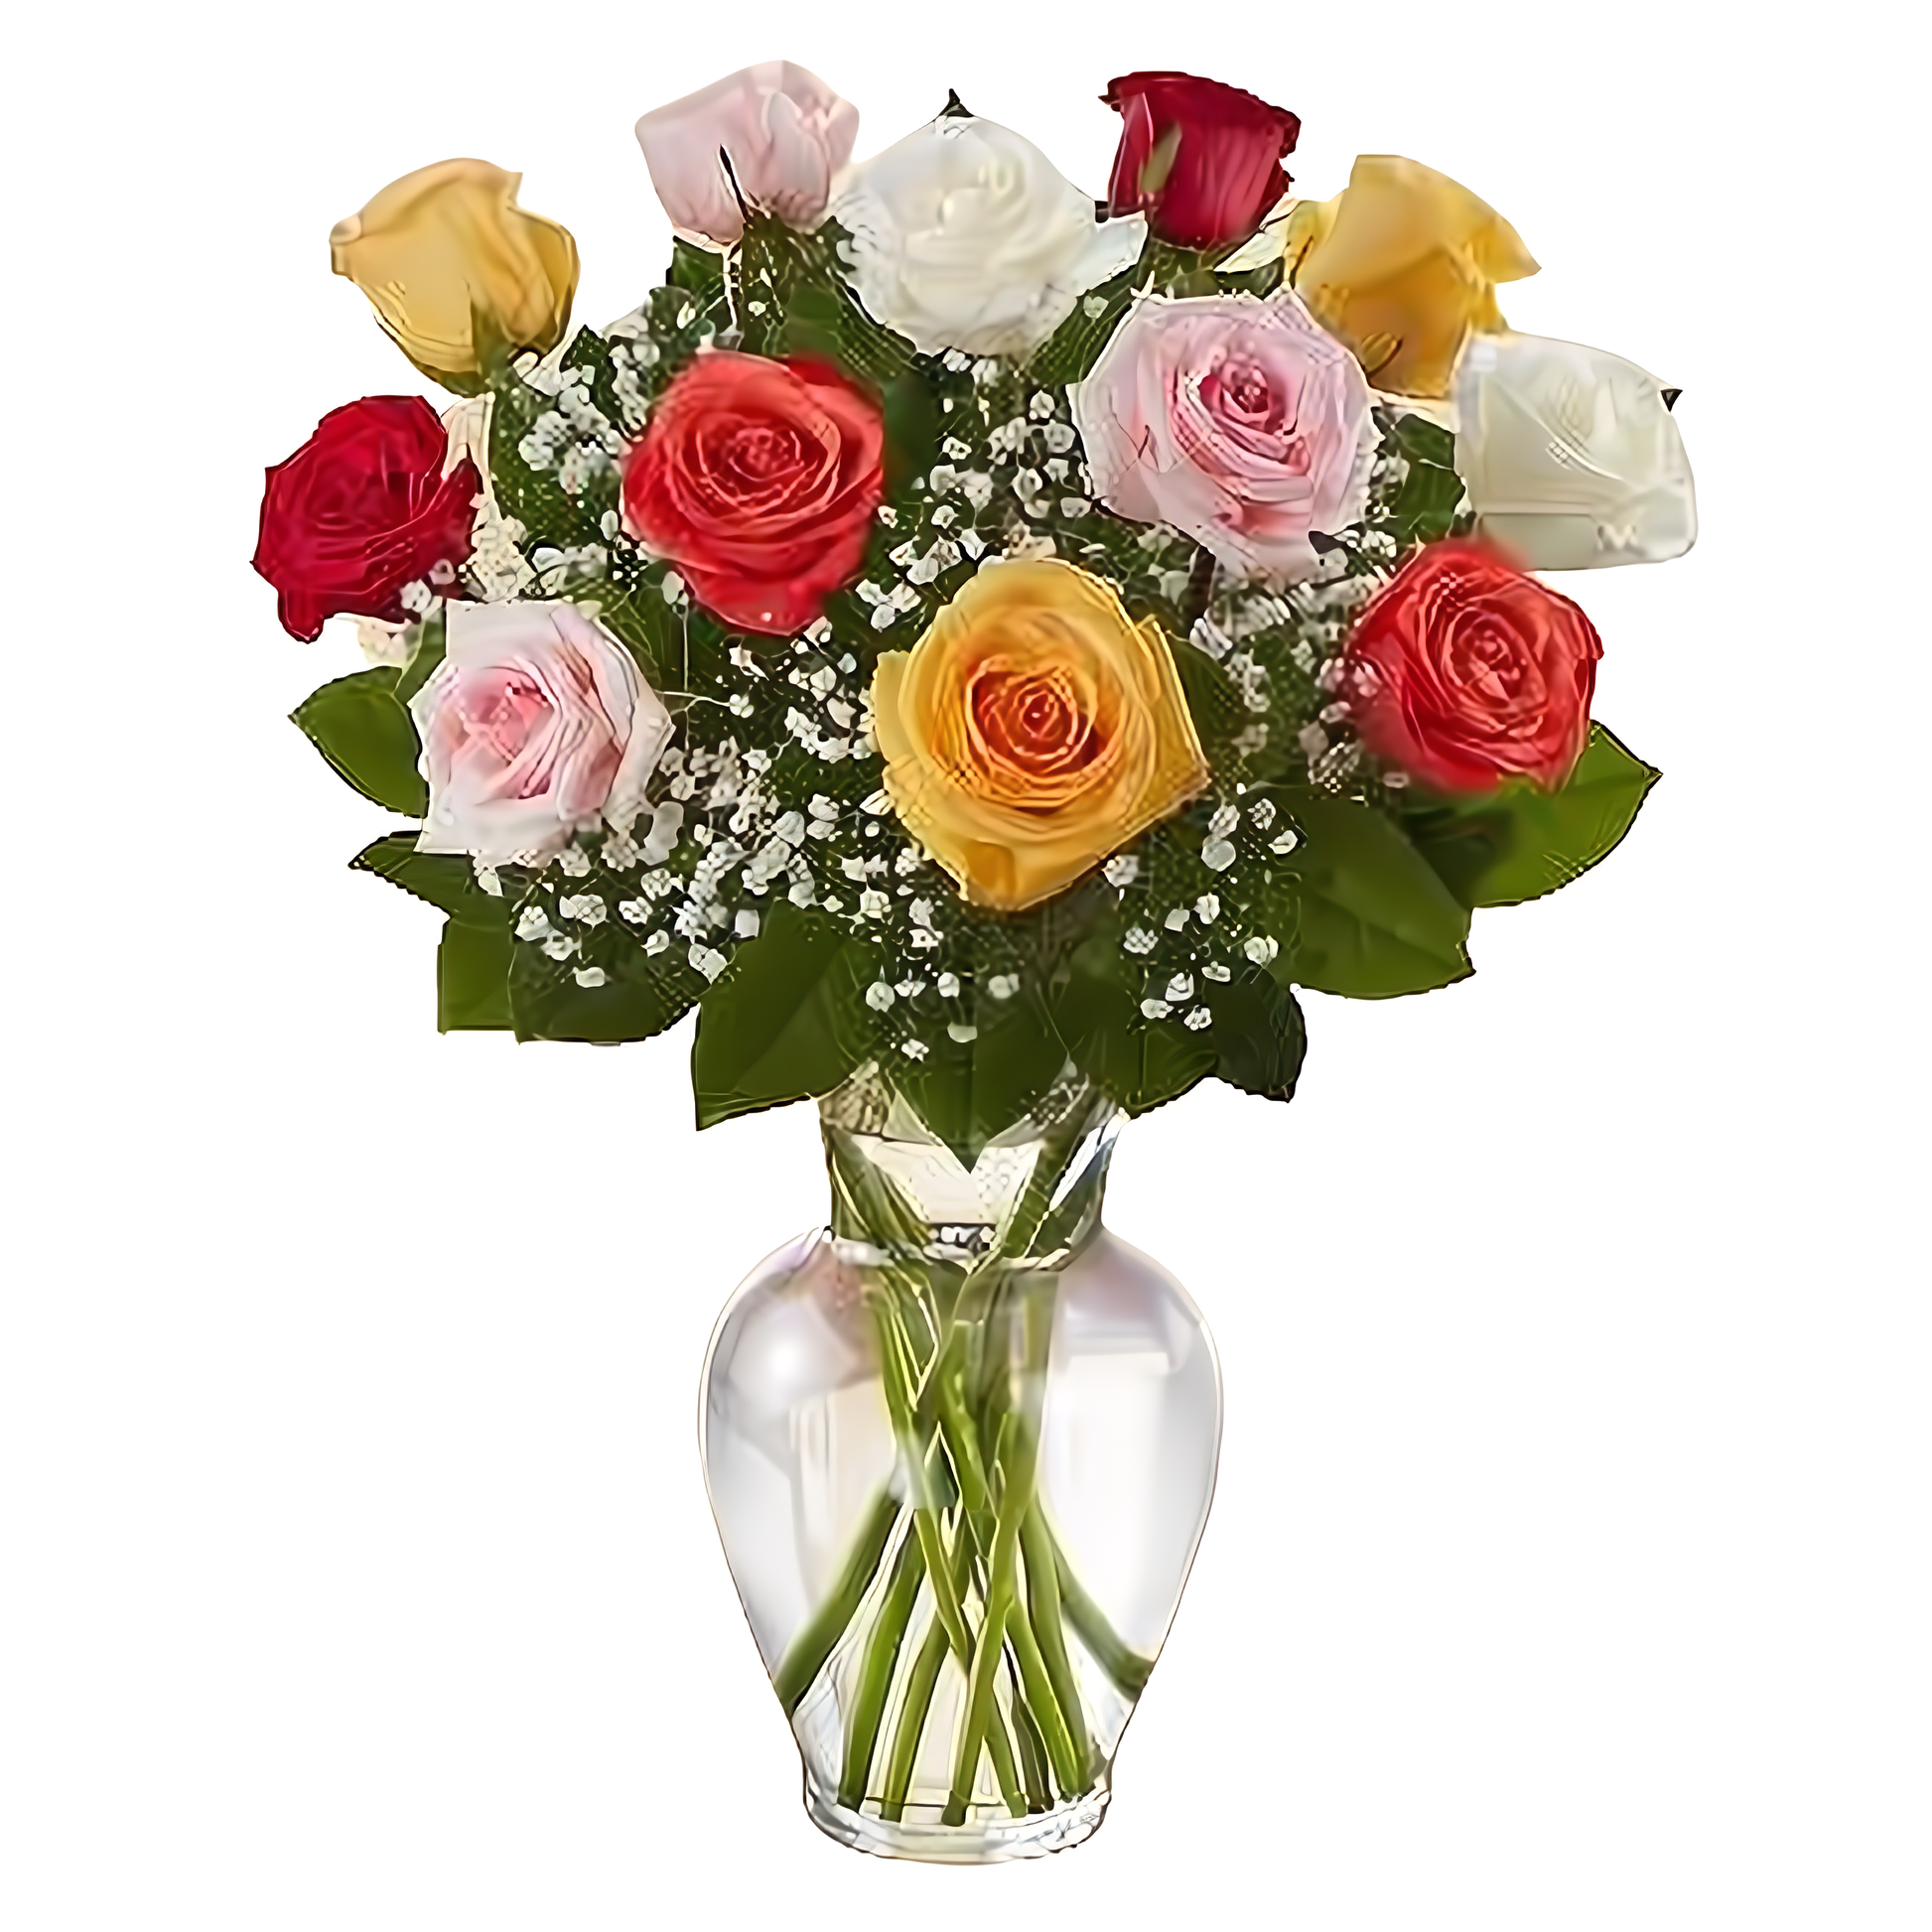 NYC Flower Delivery - Premium Long Stem Assorted Roses - Roses